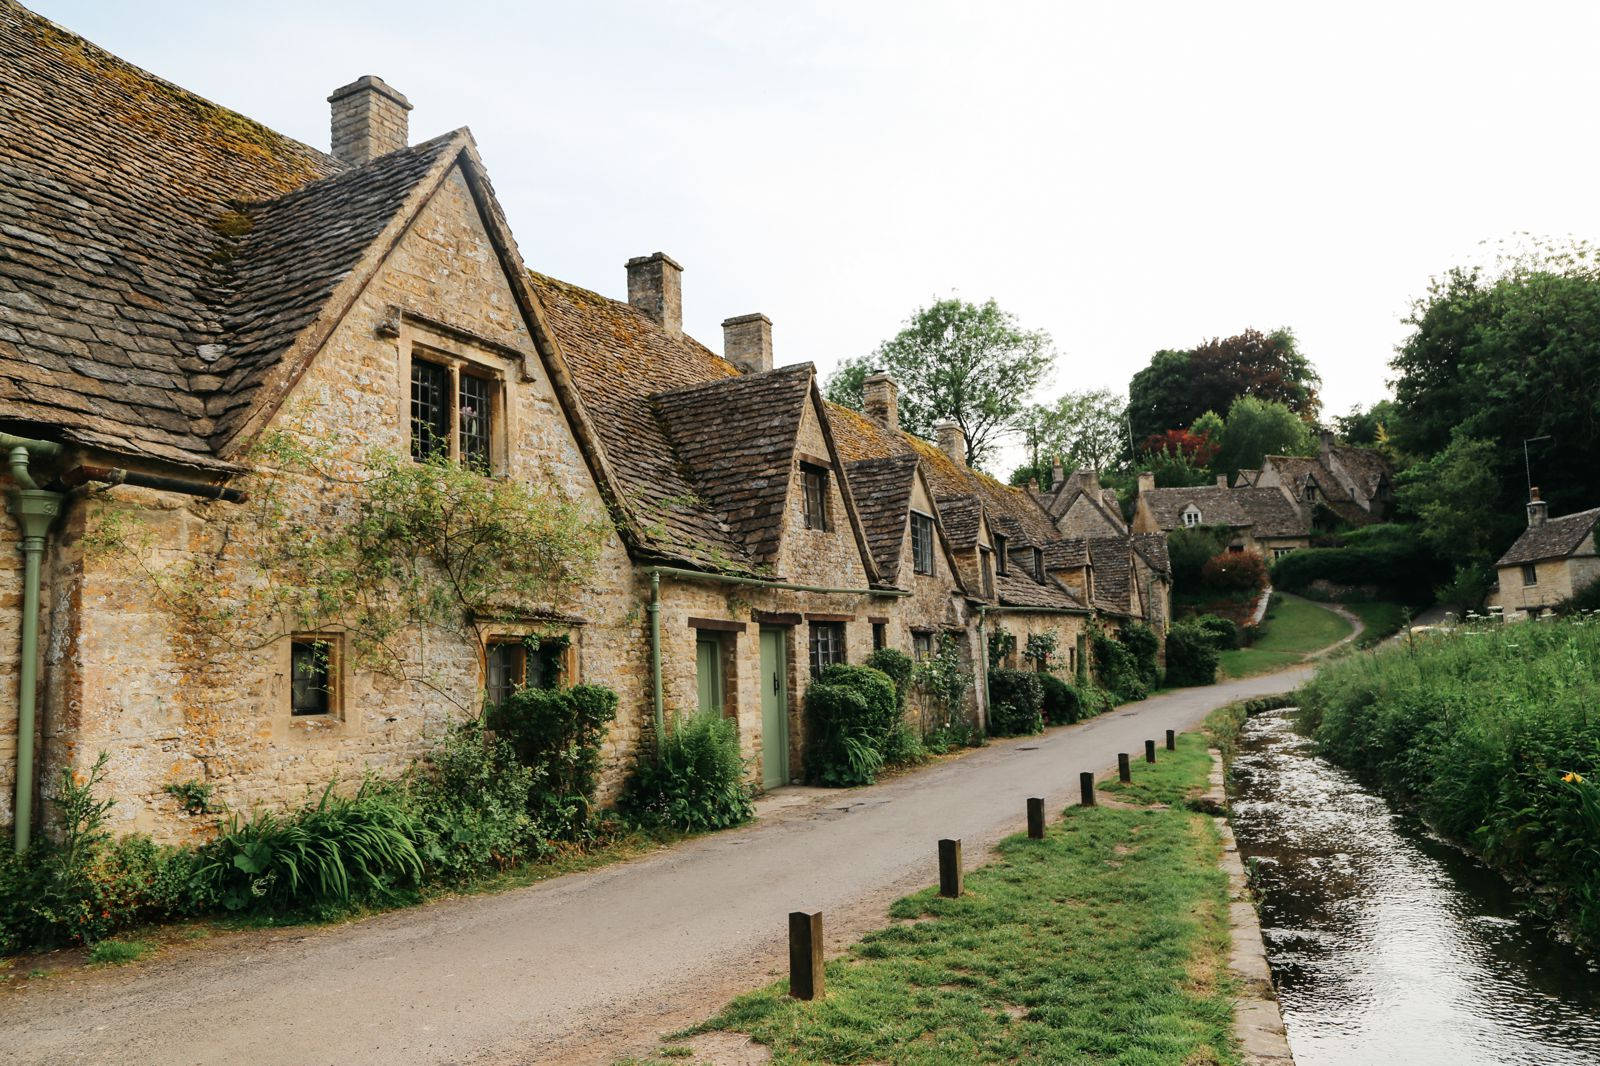 Caption: Charming Cottage Core Houses In The Uk